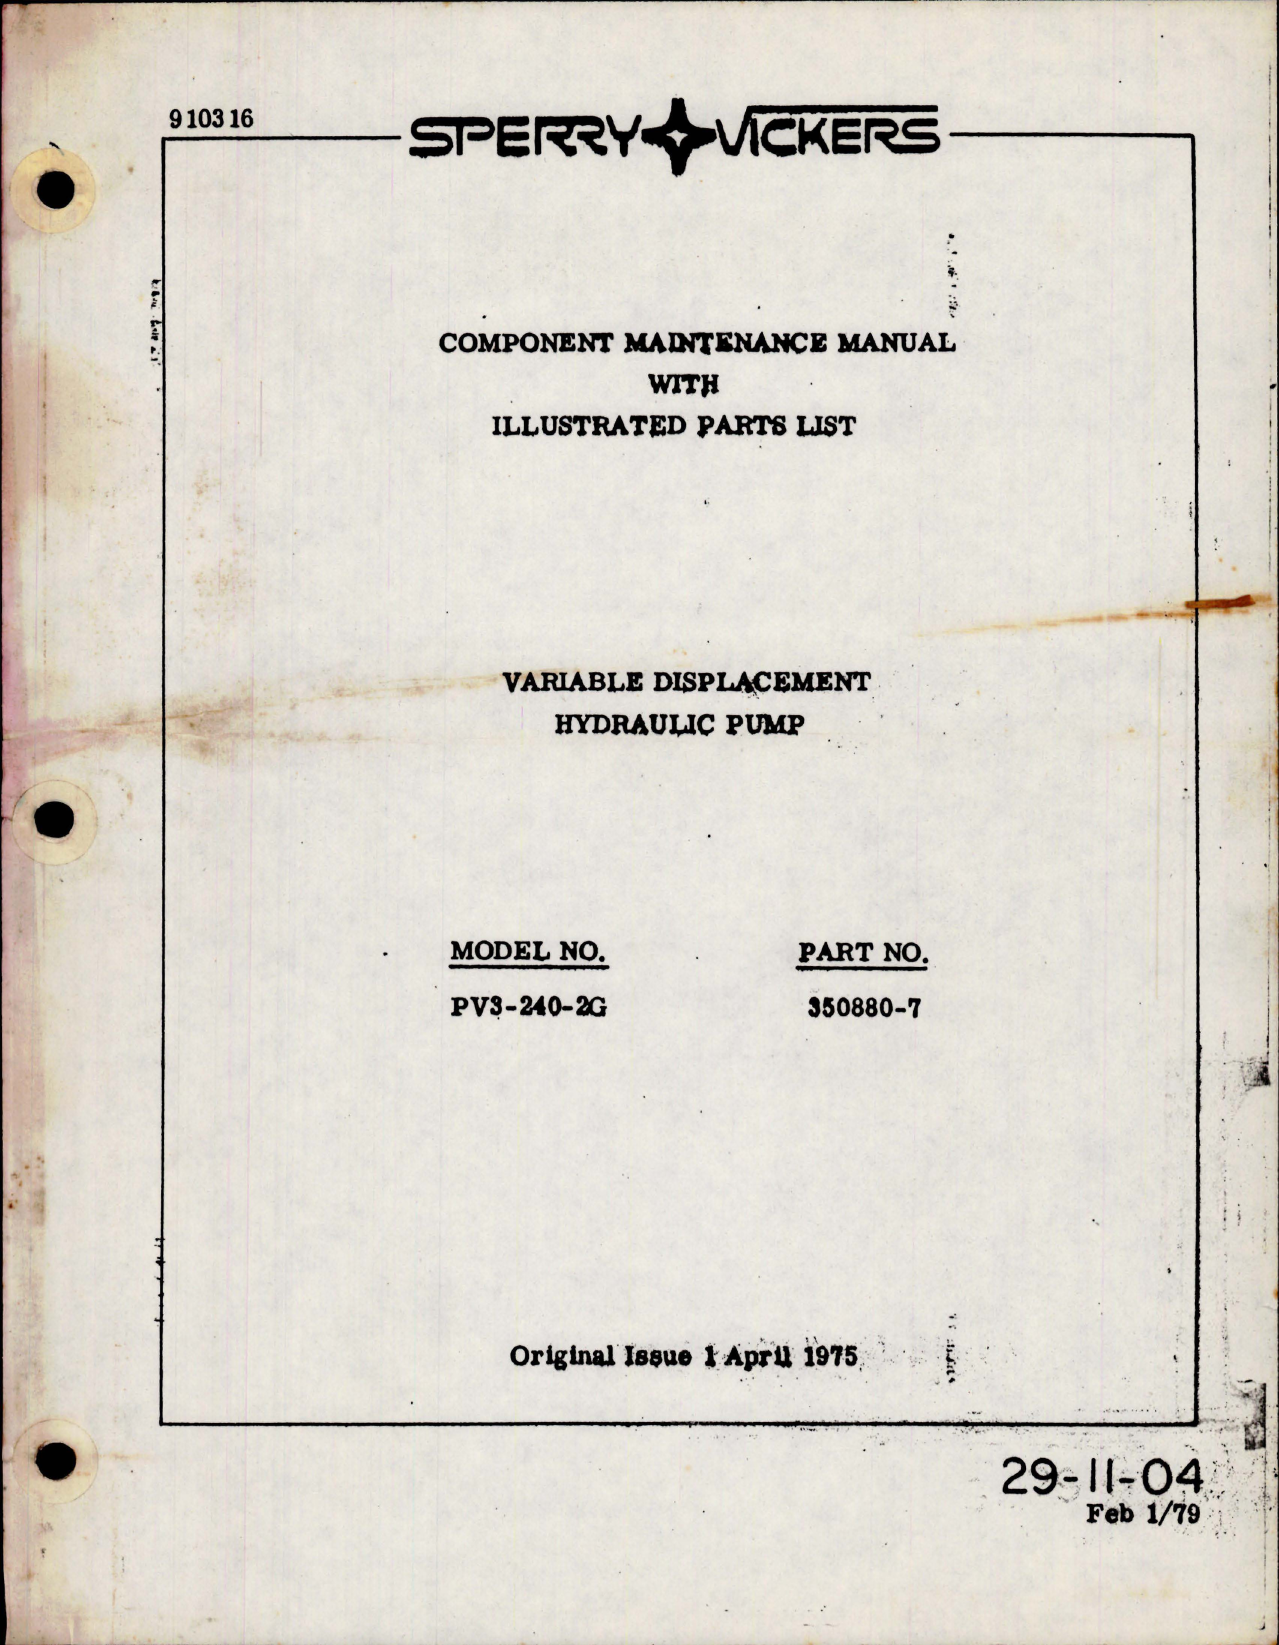 Sample page 1 from AirCorps Library document: Maintenance Manual with Illustrated Parts List for Variable Displacement Hydraulic Pump - Model PV3-240-2G - Part 360880-7